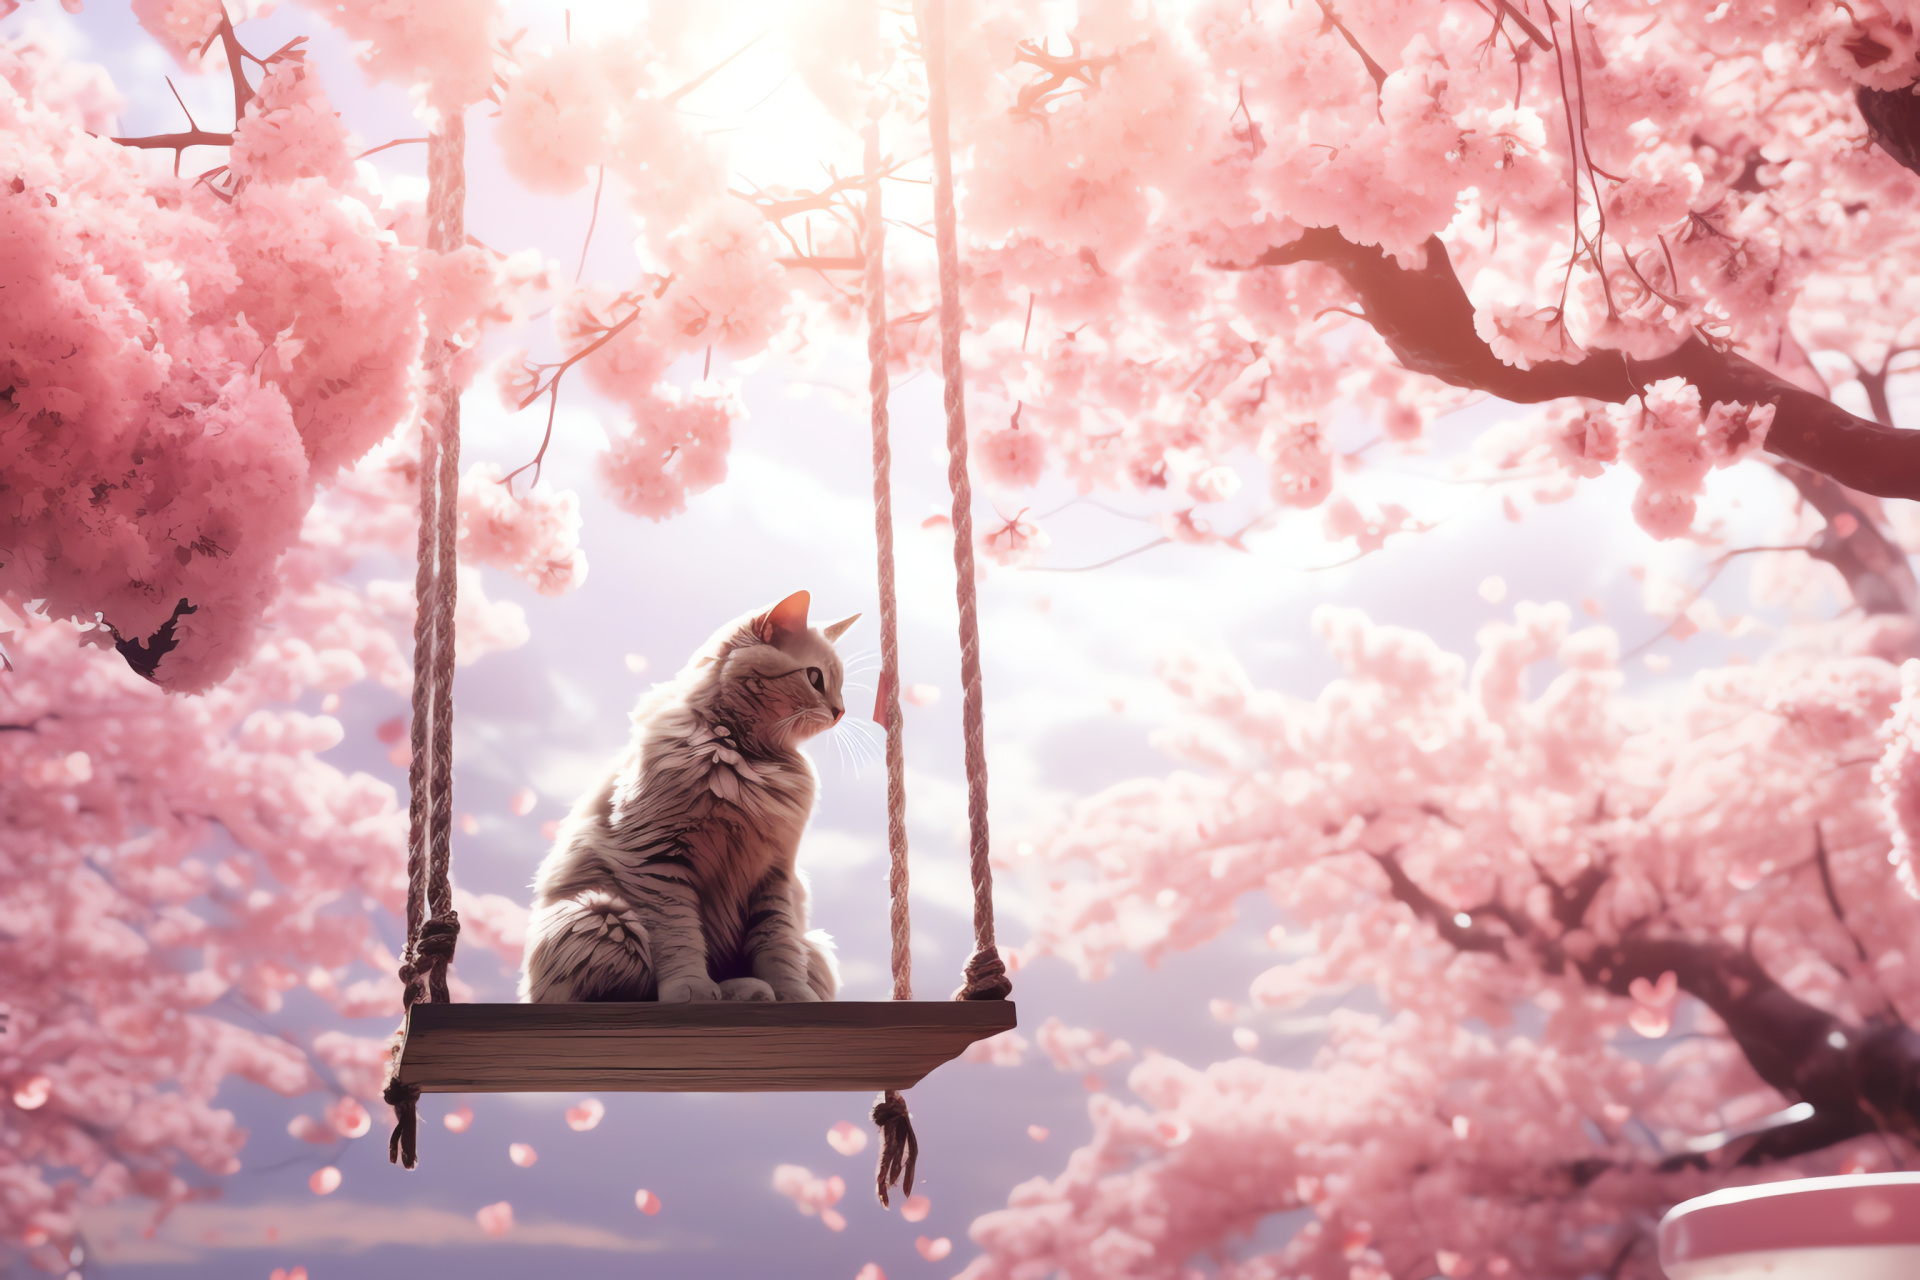 Swinging cat on Valentine's, cherry trees in bloom, pet among spring blossoms, heart decorations, romantic swing bench, HD Desktop Image